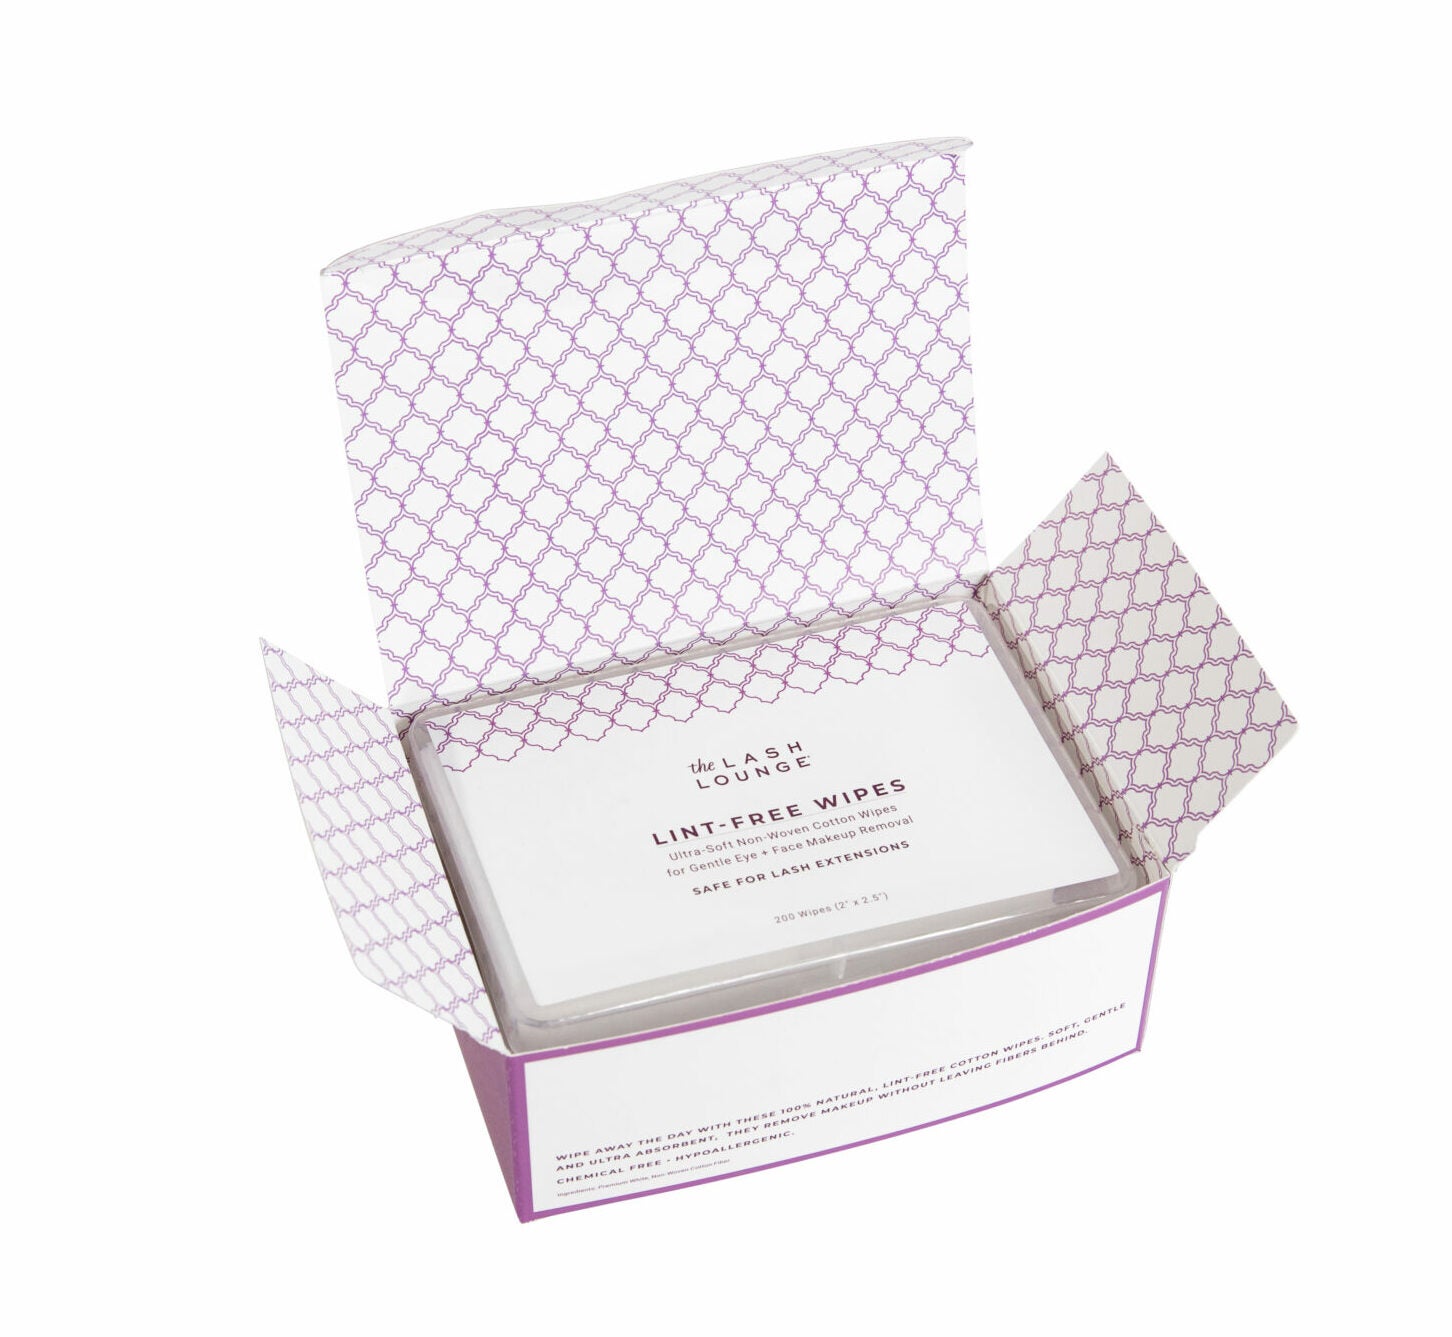 open box of Lint Free Wipes product from The Lash Lounge